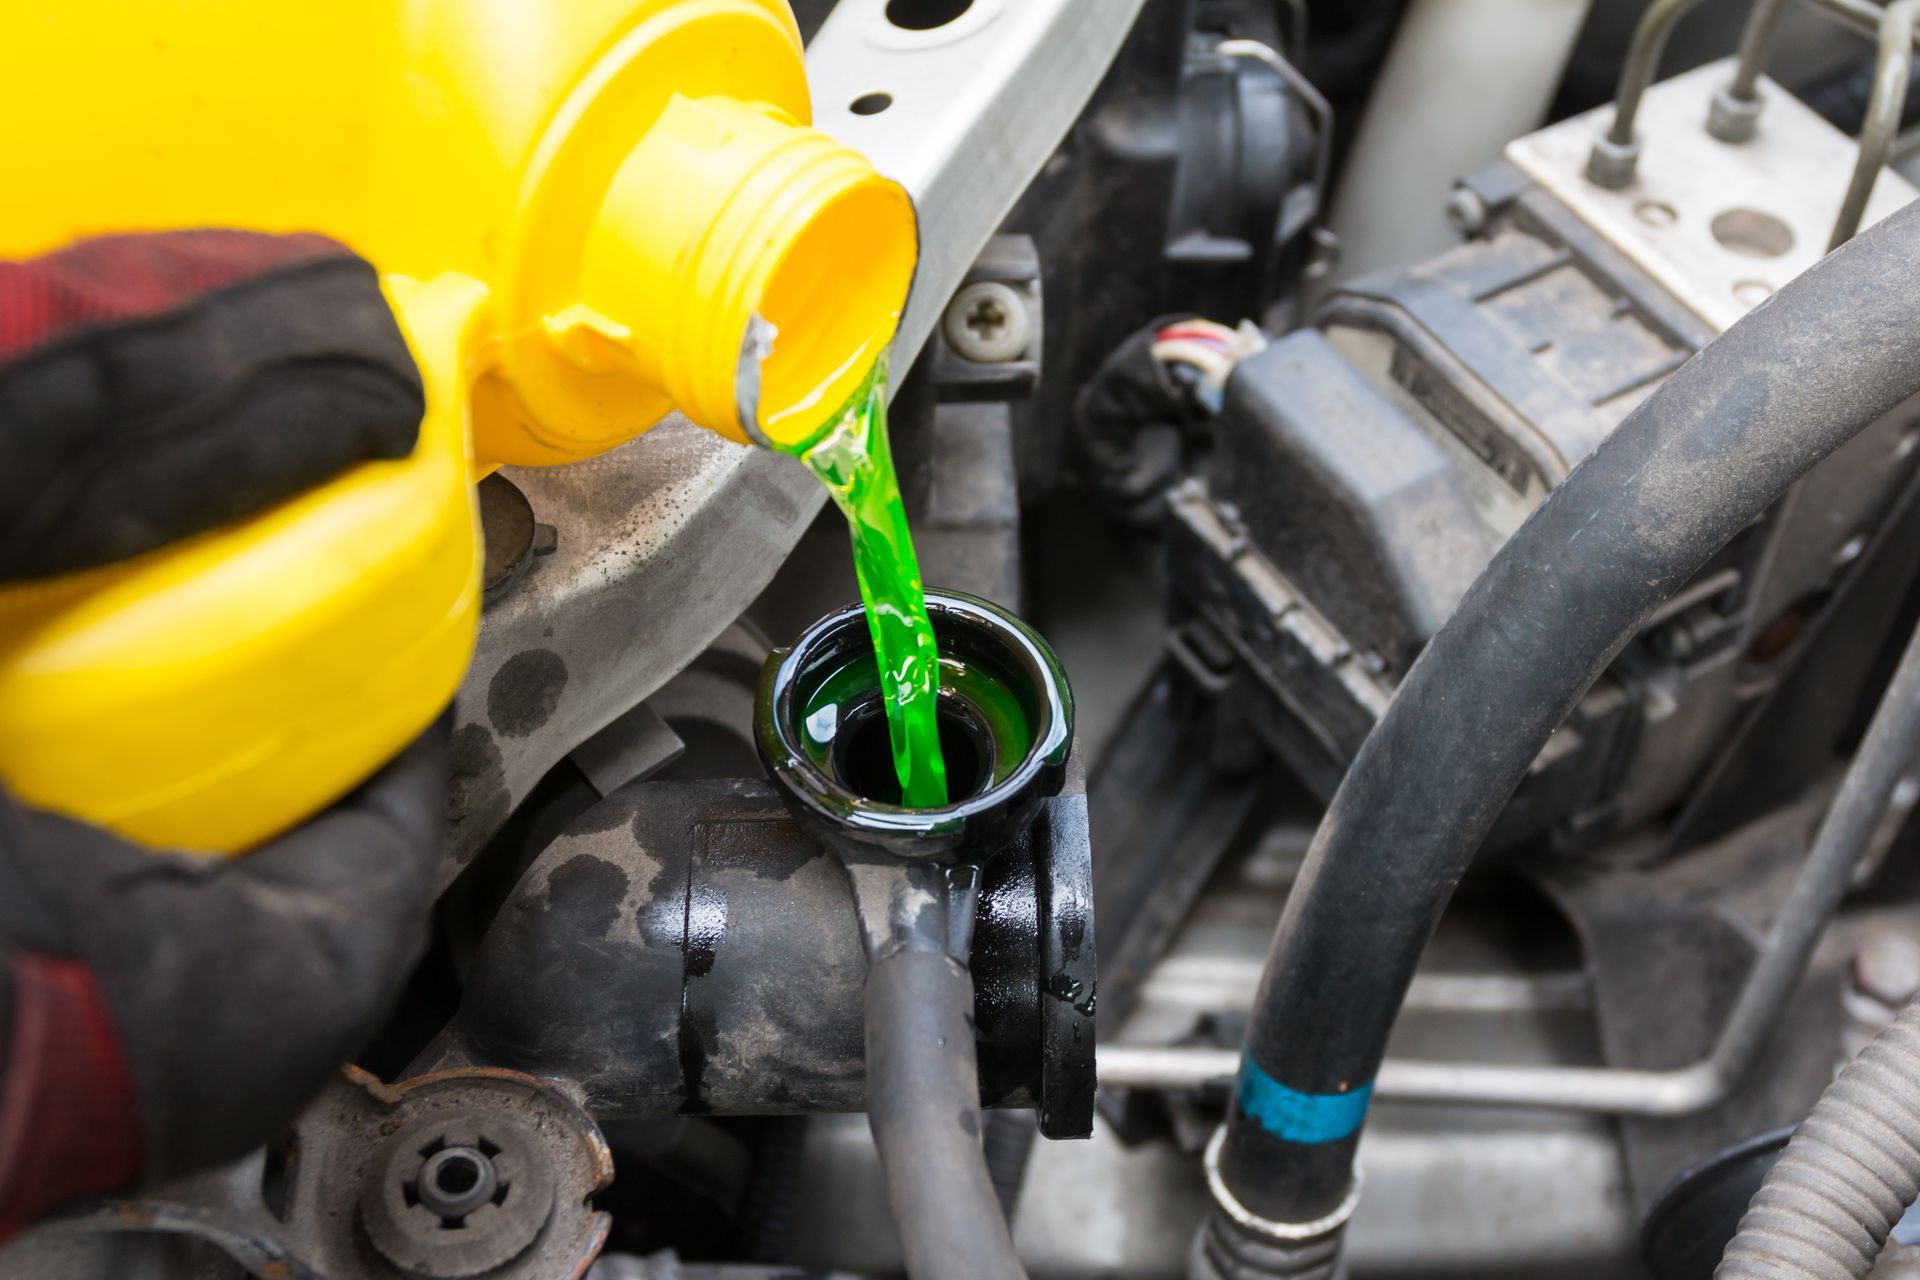 Coolant & Antifreeze at ﻿Capeway Auto Service and Towing﻿ in ﻿Hanover, MA﻿